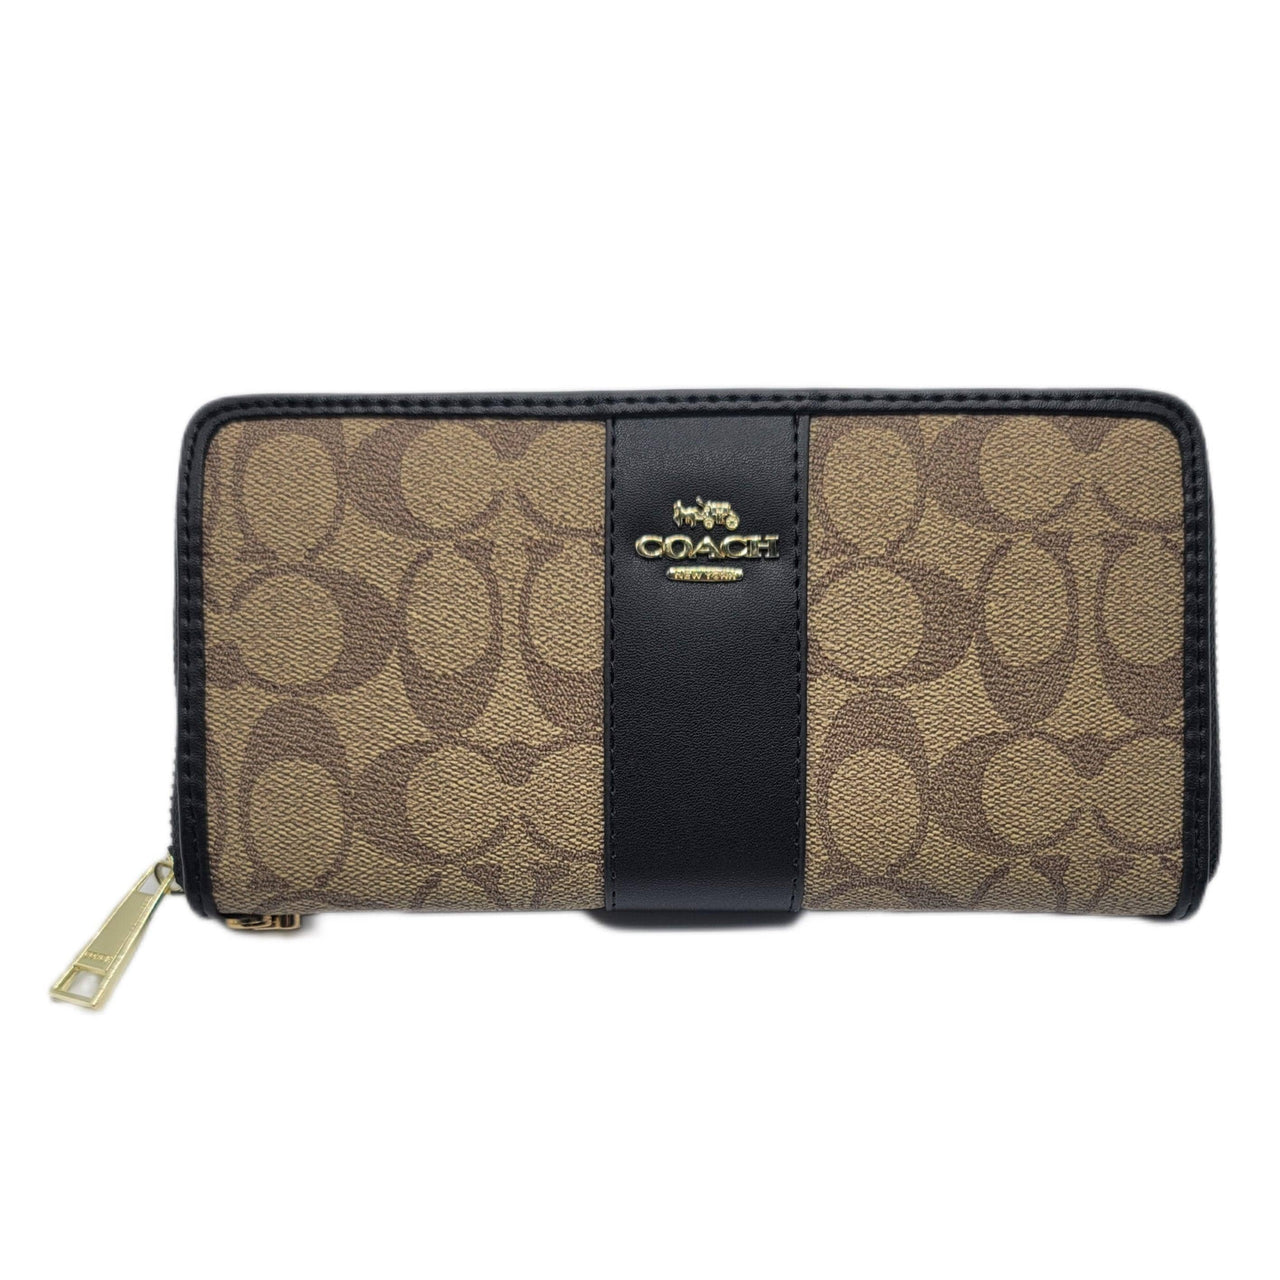 The Bag Couture Luggage & Bags Coach Zip Wallet Classic Beigeo